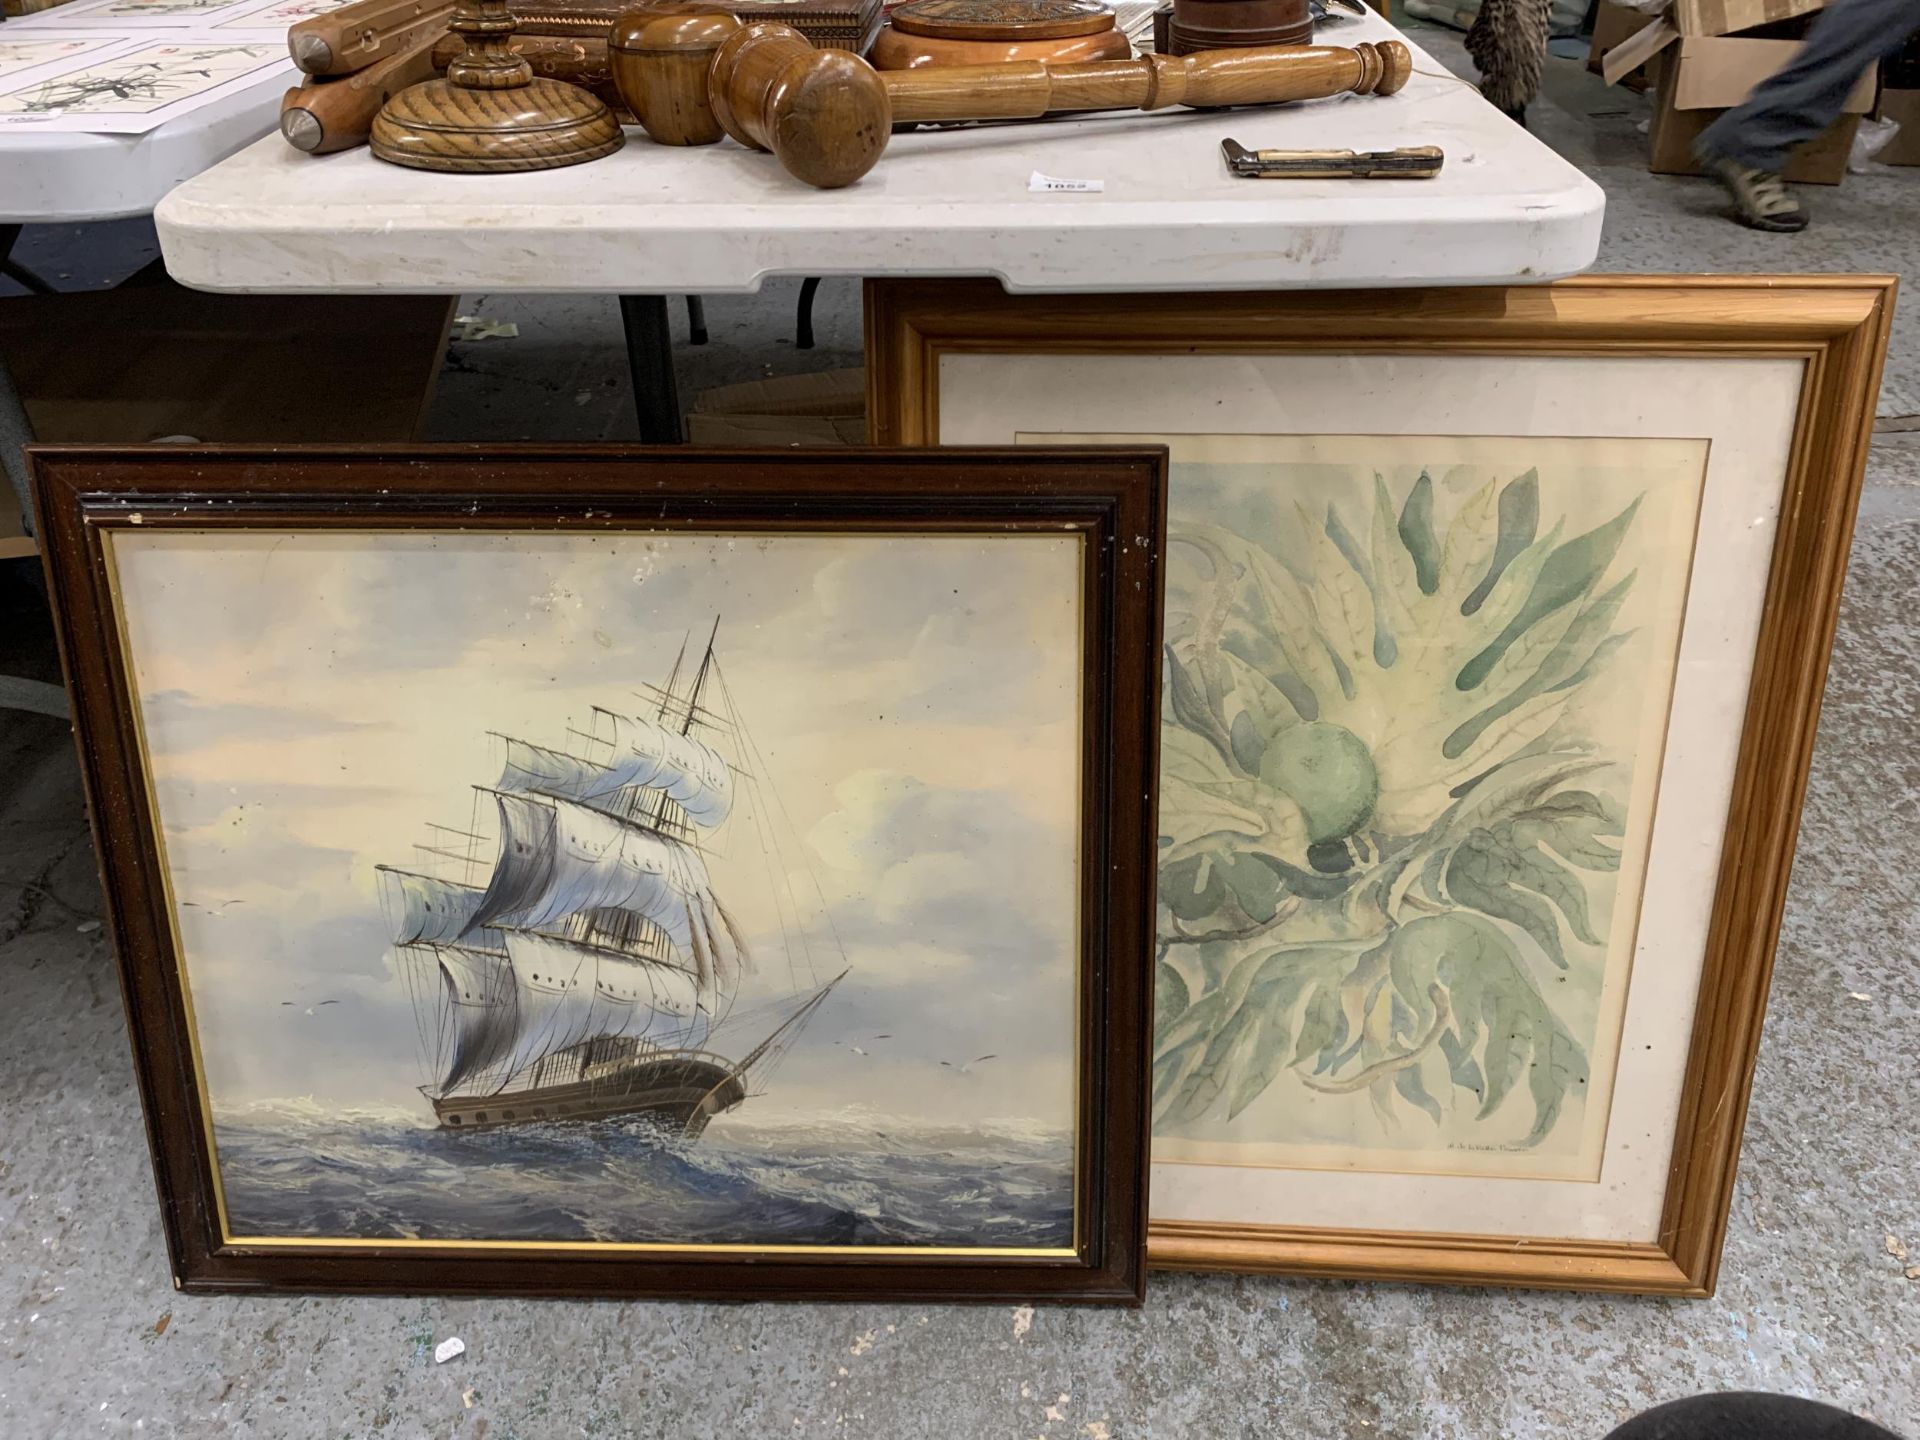 A SIGNED OIL ON CANVAS OF A SAILING SHIP PLUS A FLORAL PRINT